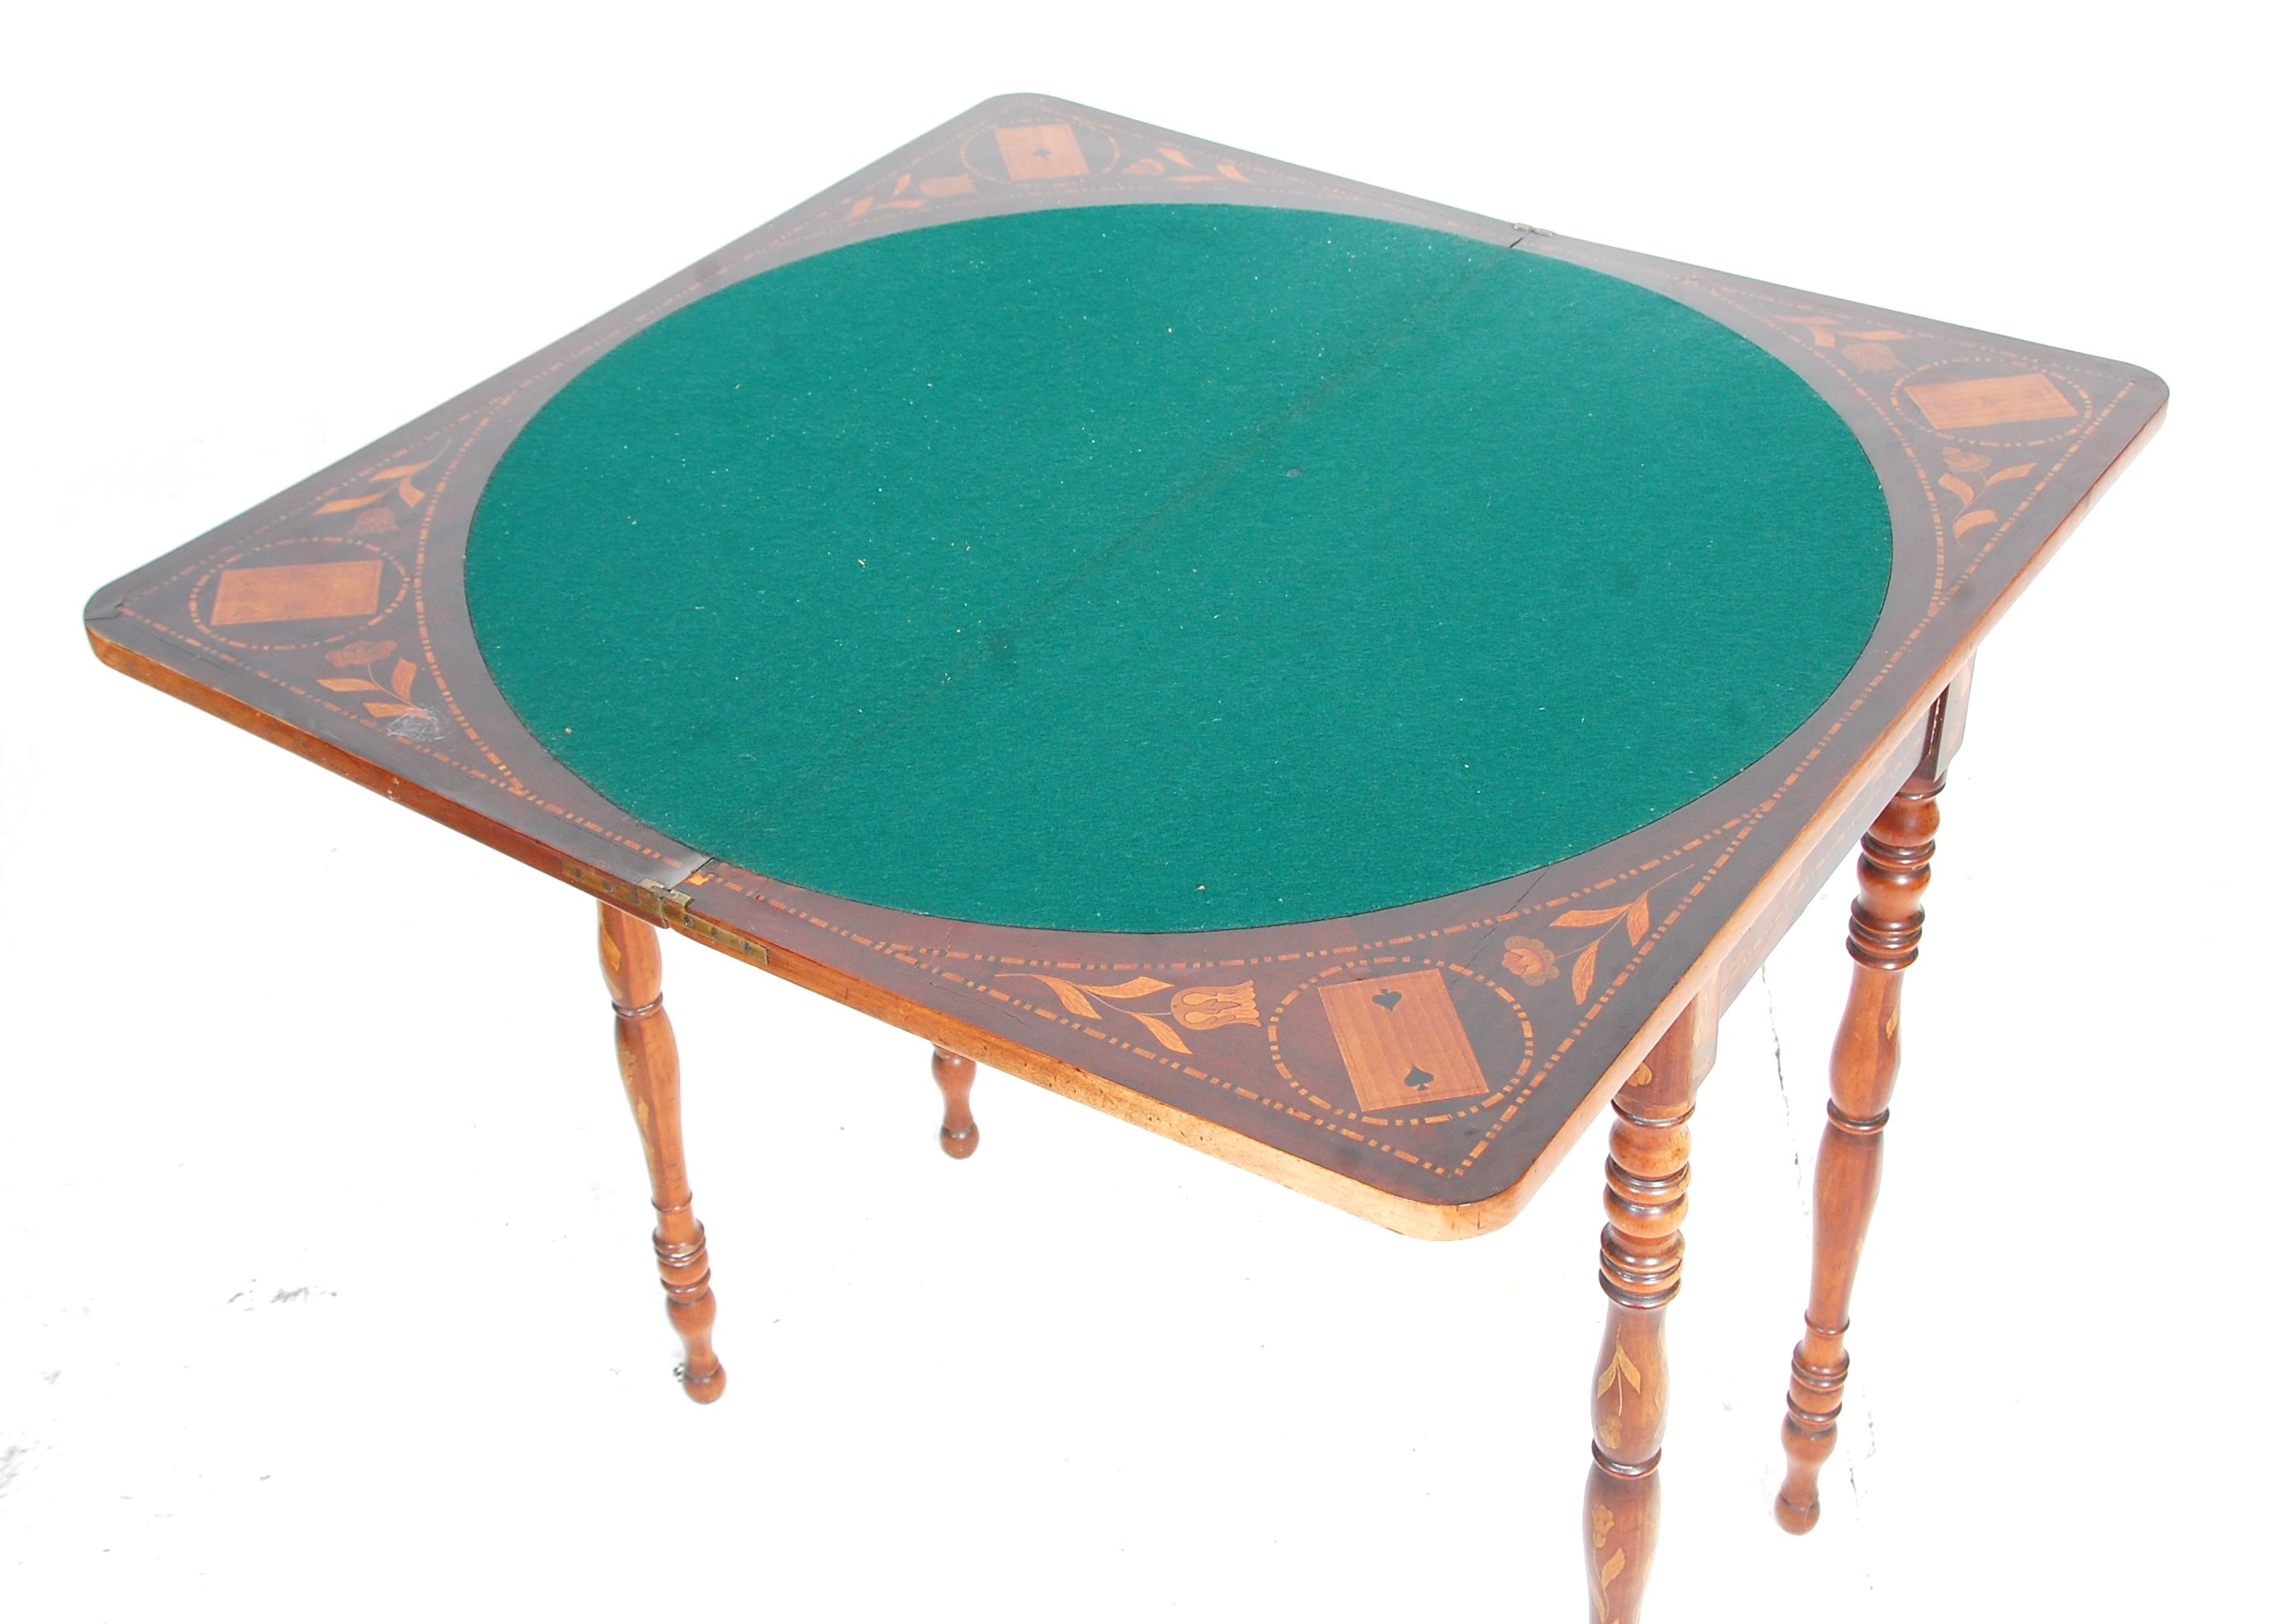 EARLY 19TH CENTURY ANTIQUE WALNUT CARD GAMES TABLE - Image 5 of 6